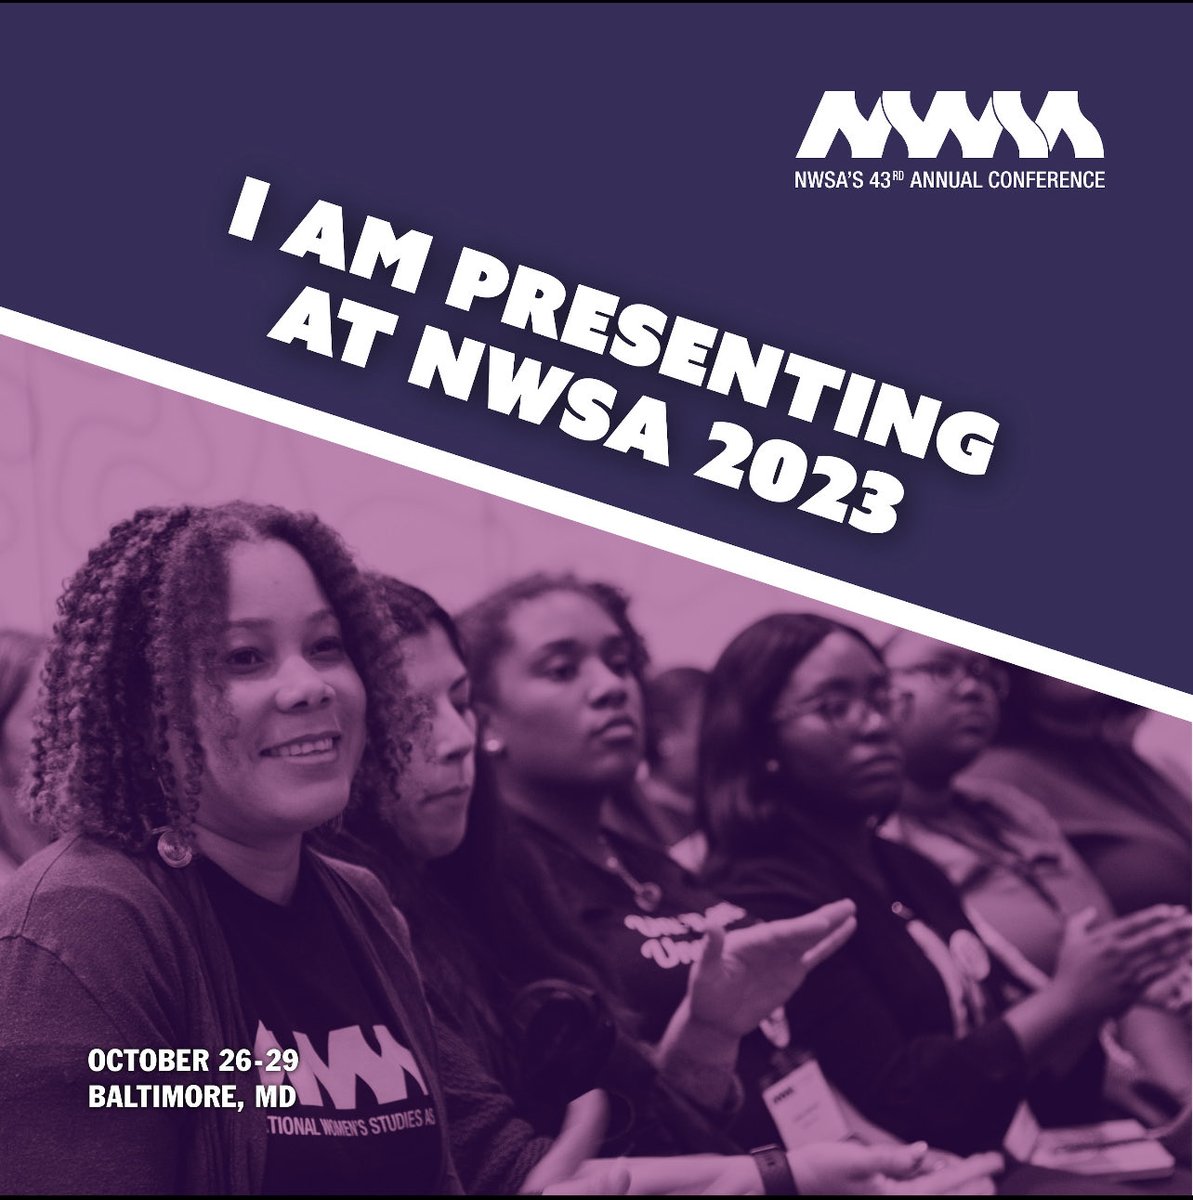 I’m presenting at this year’s NWSA Conference - “Actresses, Intimacy, and Queering Consent.” I’ve done lots of public appearances but this is my first at an academic conference. Theory heads - come say hi! 💕 #actress #writer #intimacycoordinator #womensstudies #queertheory